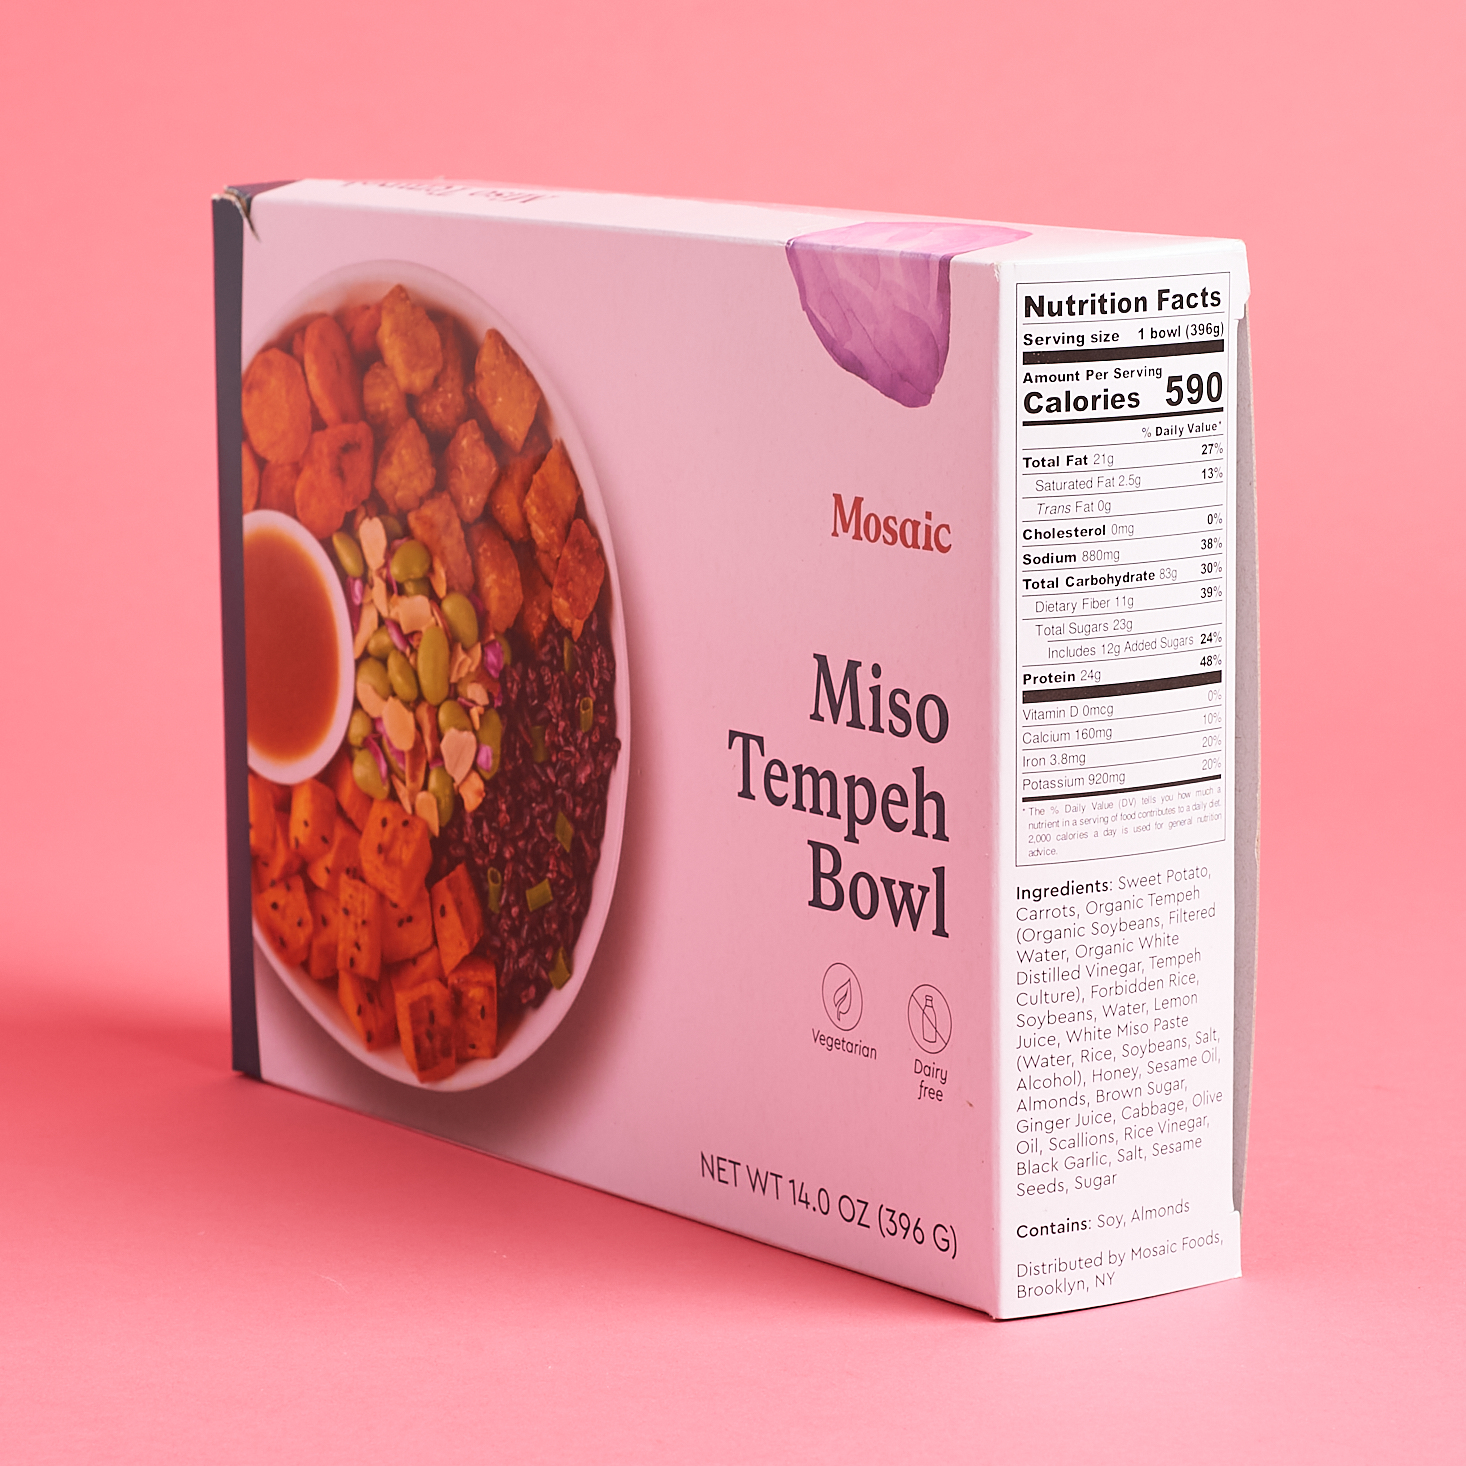 Mosaic Foods Miso Tempeh Bowl Nutrition Facts